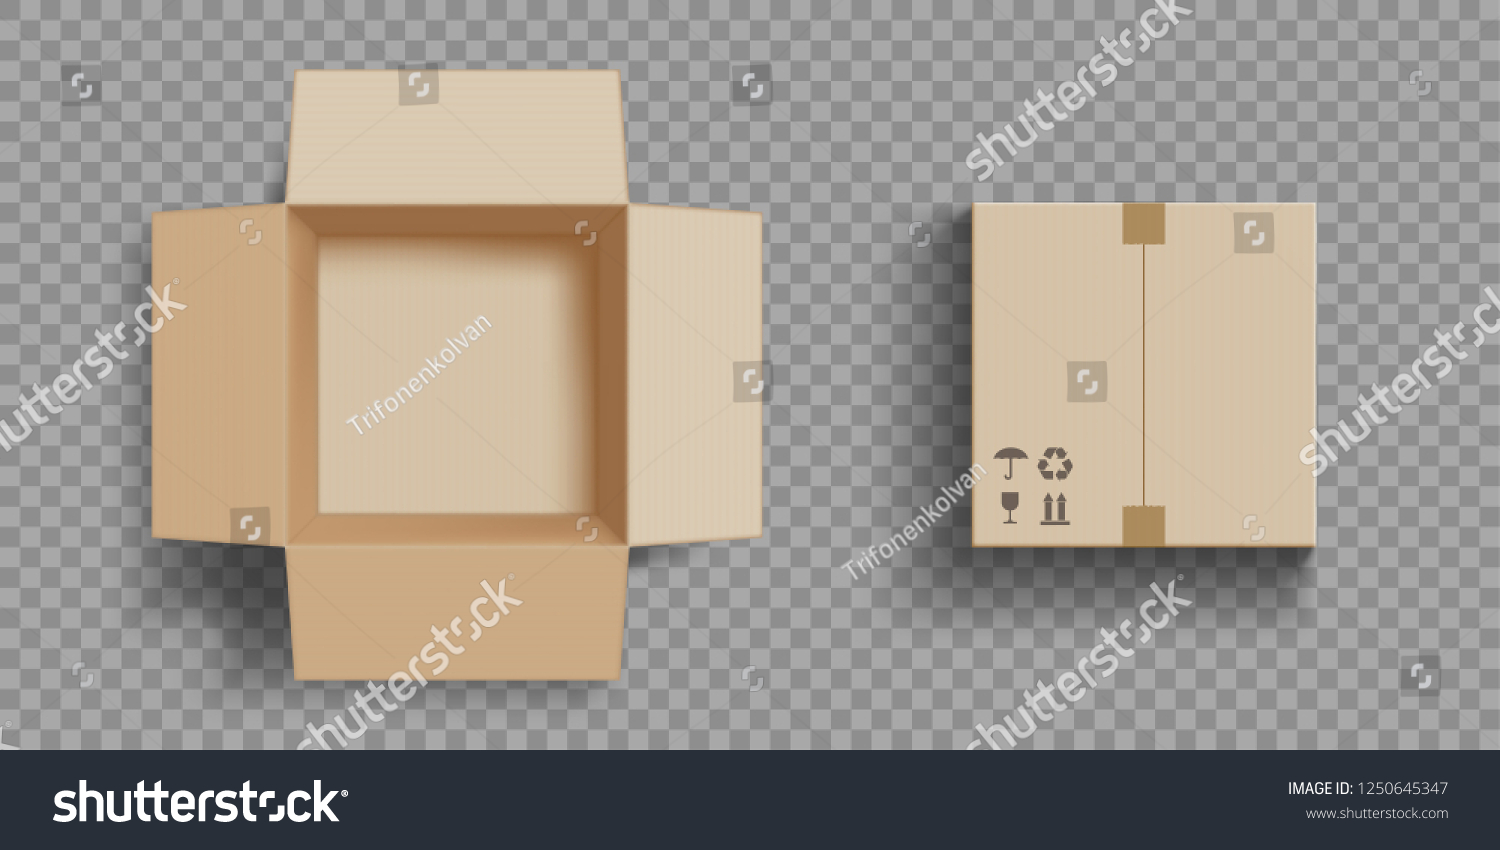 Empty open and closed cardboard box. Isolated on a transparent background. Vector illustration. #1250645347